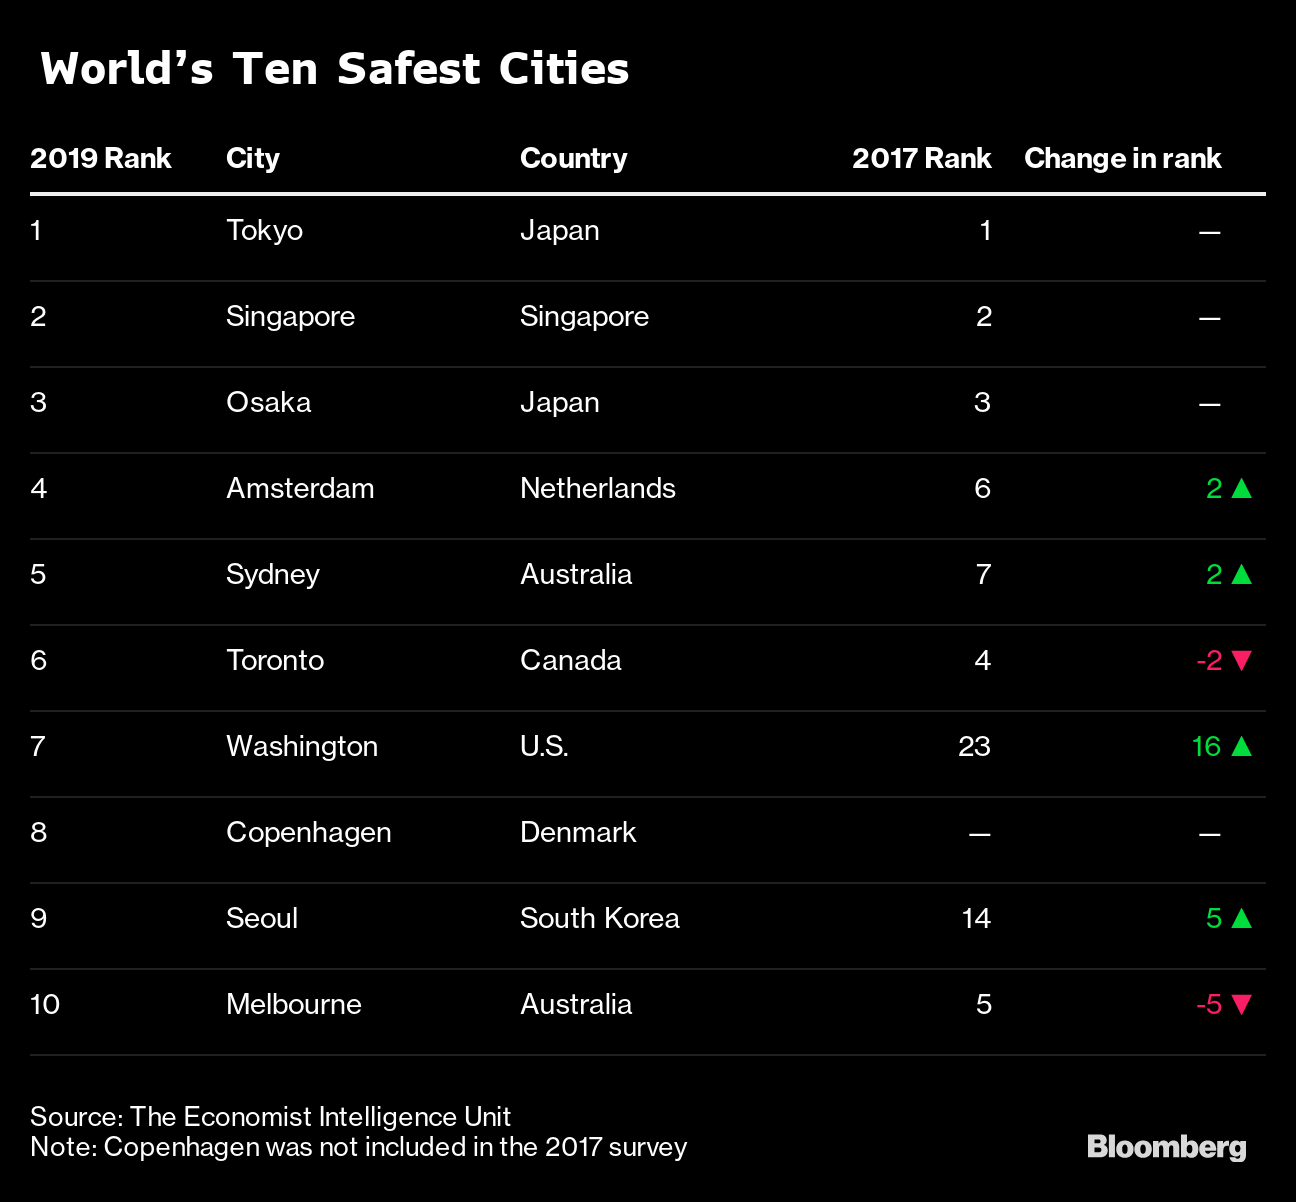 The 19 Best Cities in the World in 2019, Ranked